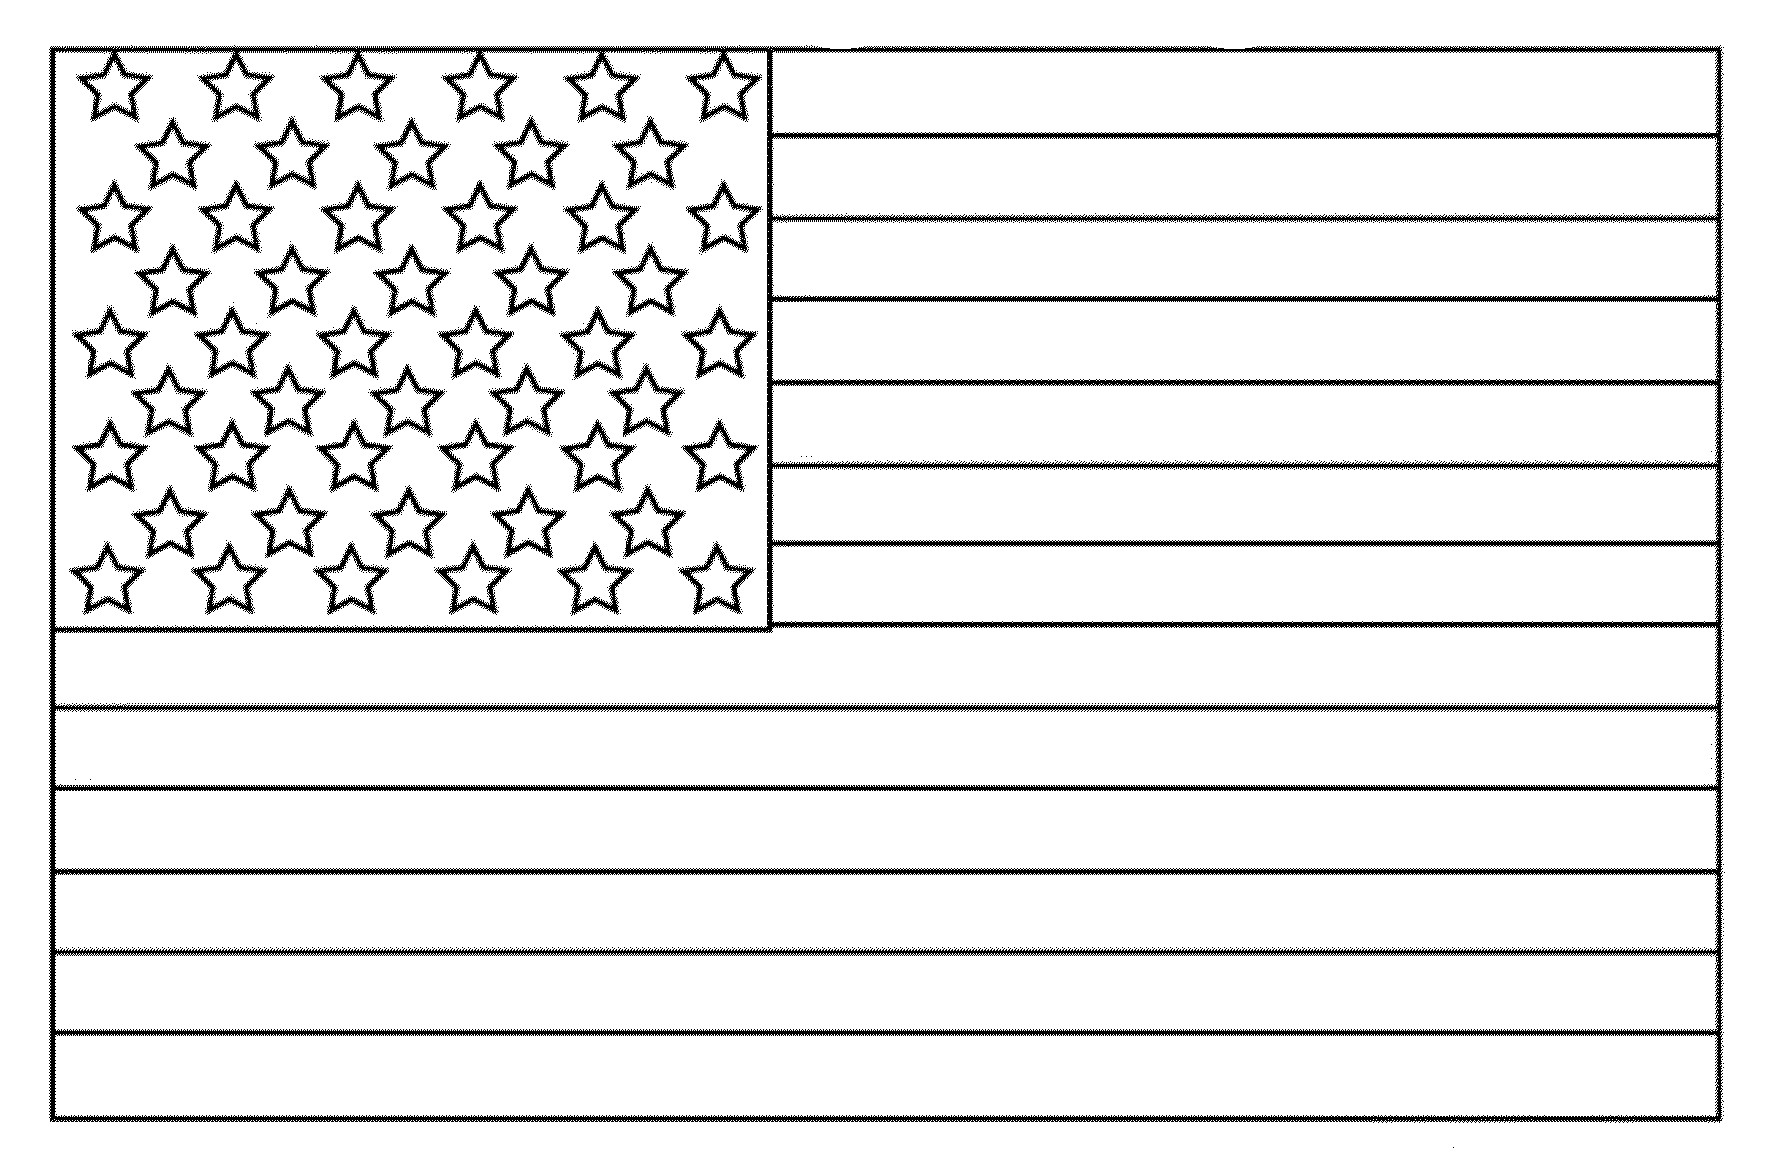 American Flag Coloring Pages
 American Flag Coloring Page for the Love of the Country